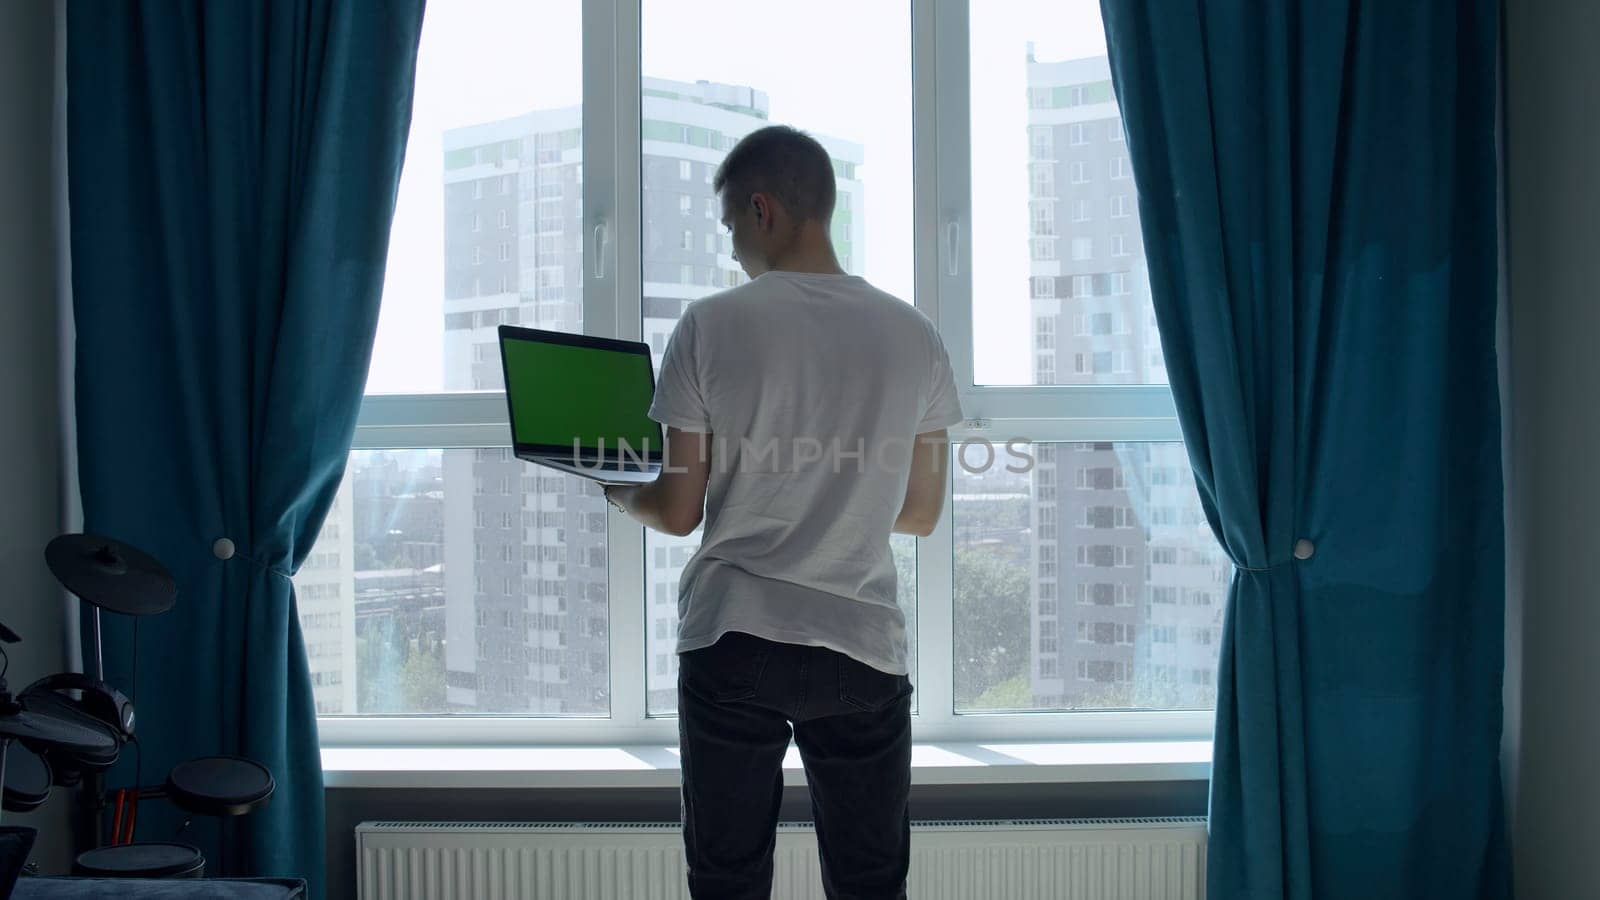 The screen in the laptop is green. Media. A man picking at a laptop with a green screen in front of a light window